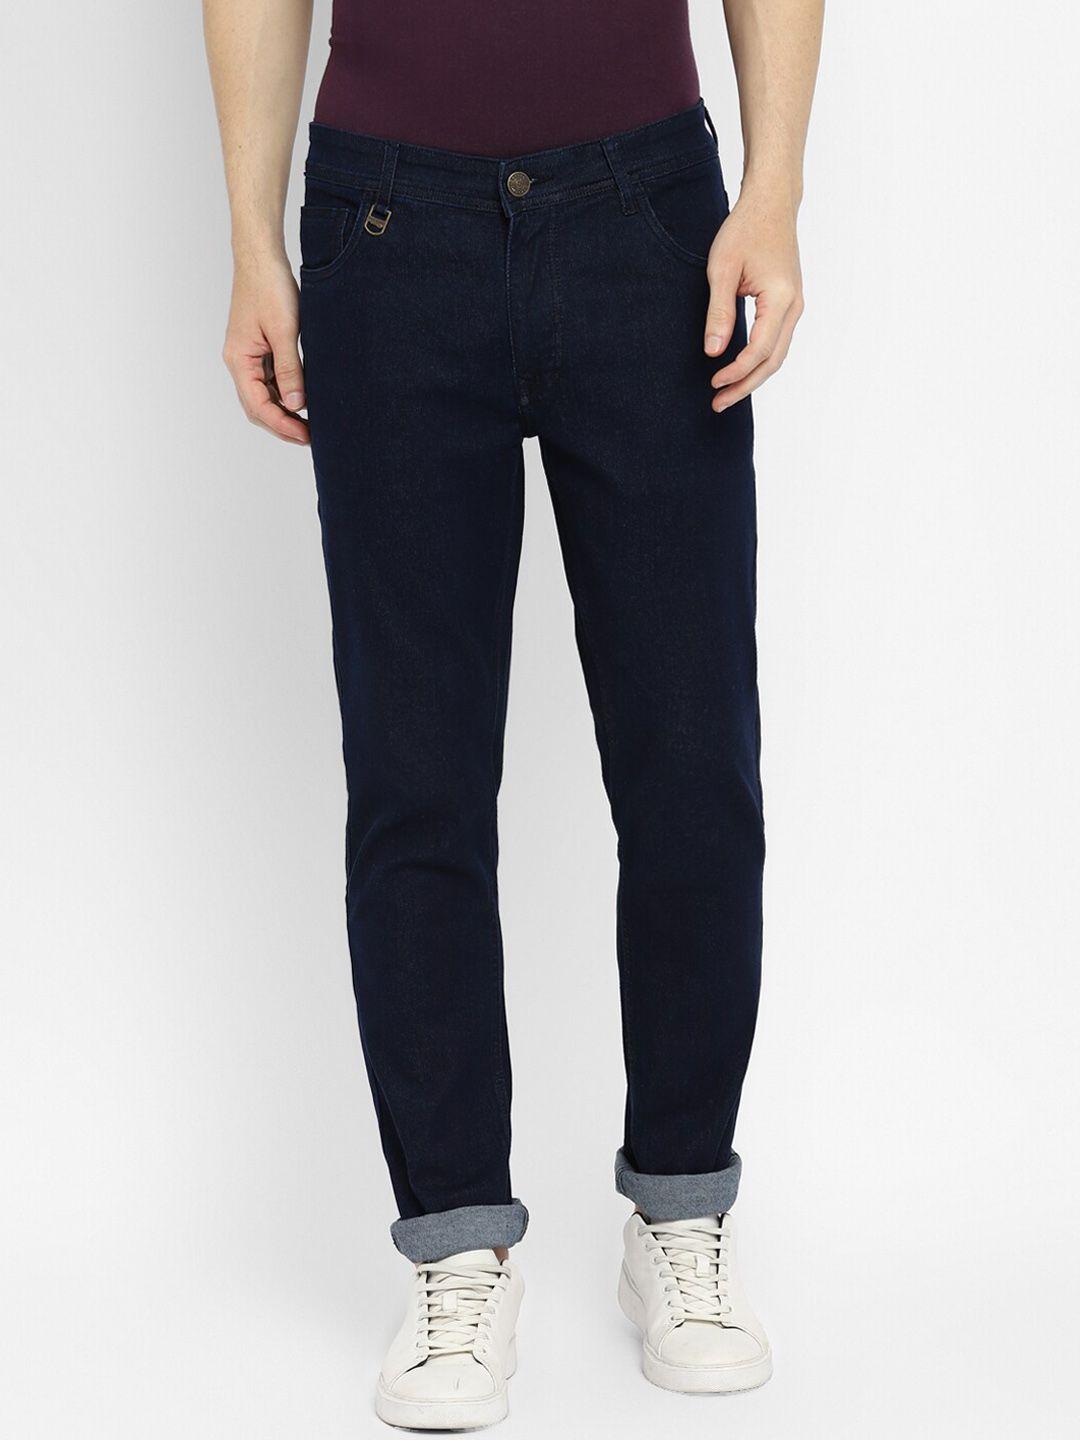 red chief men navy blue stretchable jeans